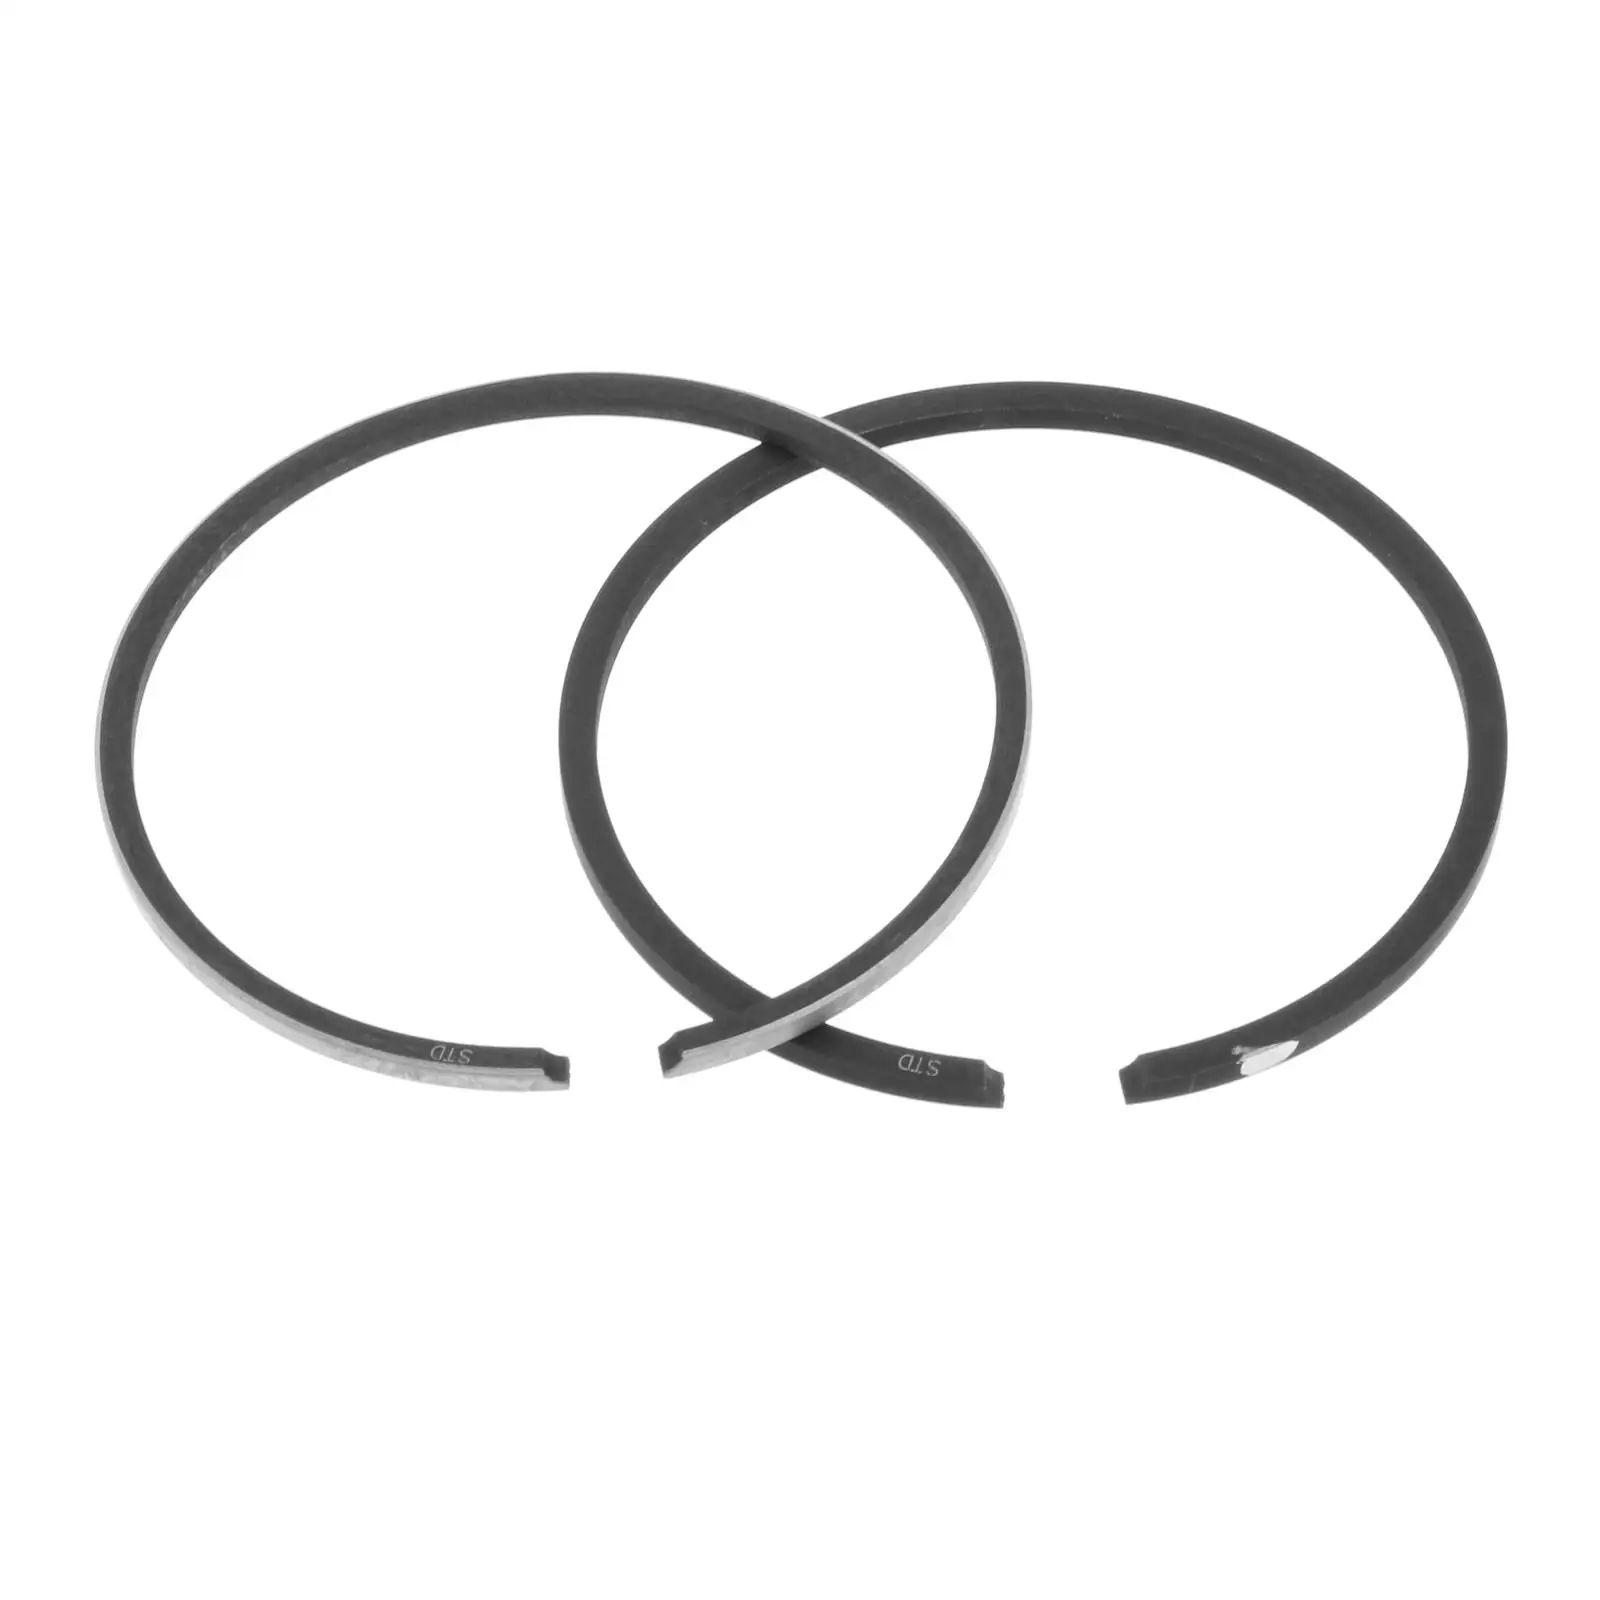 Engine Piston Rings Set Replace 682-11610-01-00 for Hidea 9.9HP Outboards